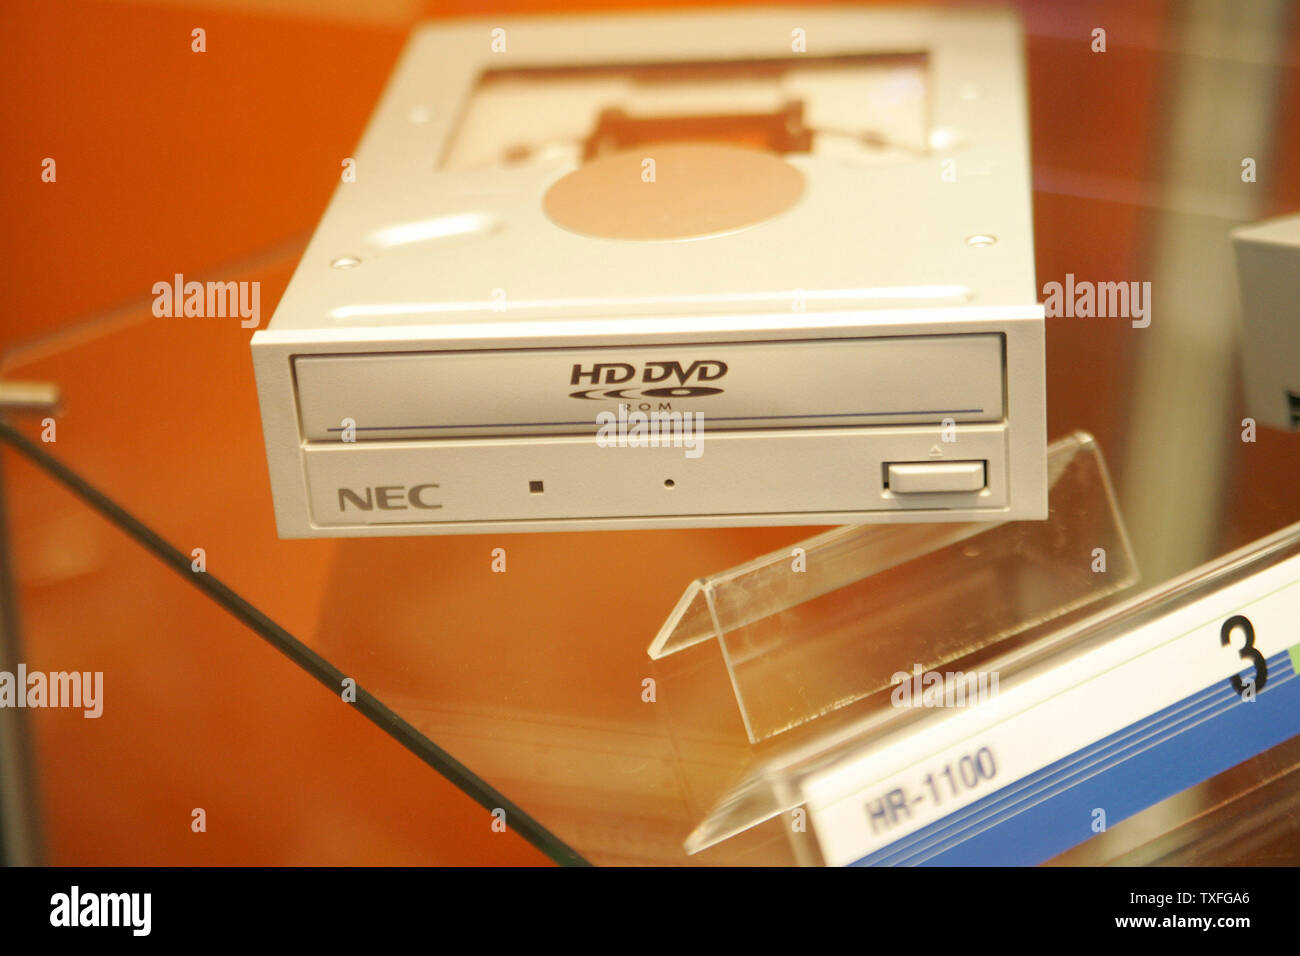 Nec Introduces The World S First 5 1 4 Inch Pc Drive For Hd Dvds At Ifa 05 World Of Consumer Electronics Trade Fair In Berlin Germany September 6 05 The Hr 1100a Will Be In